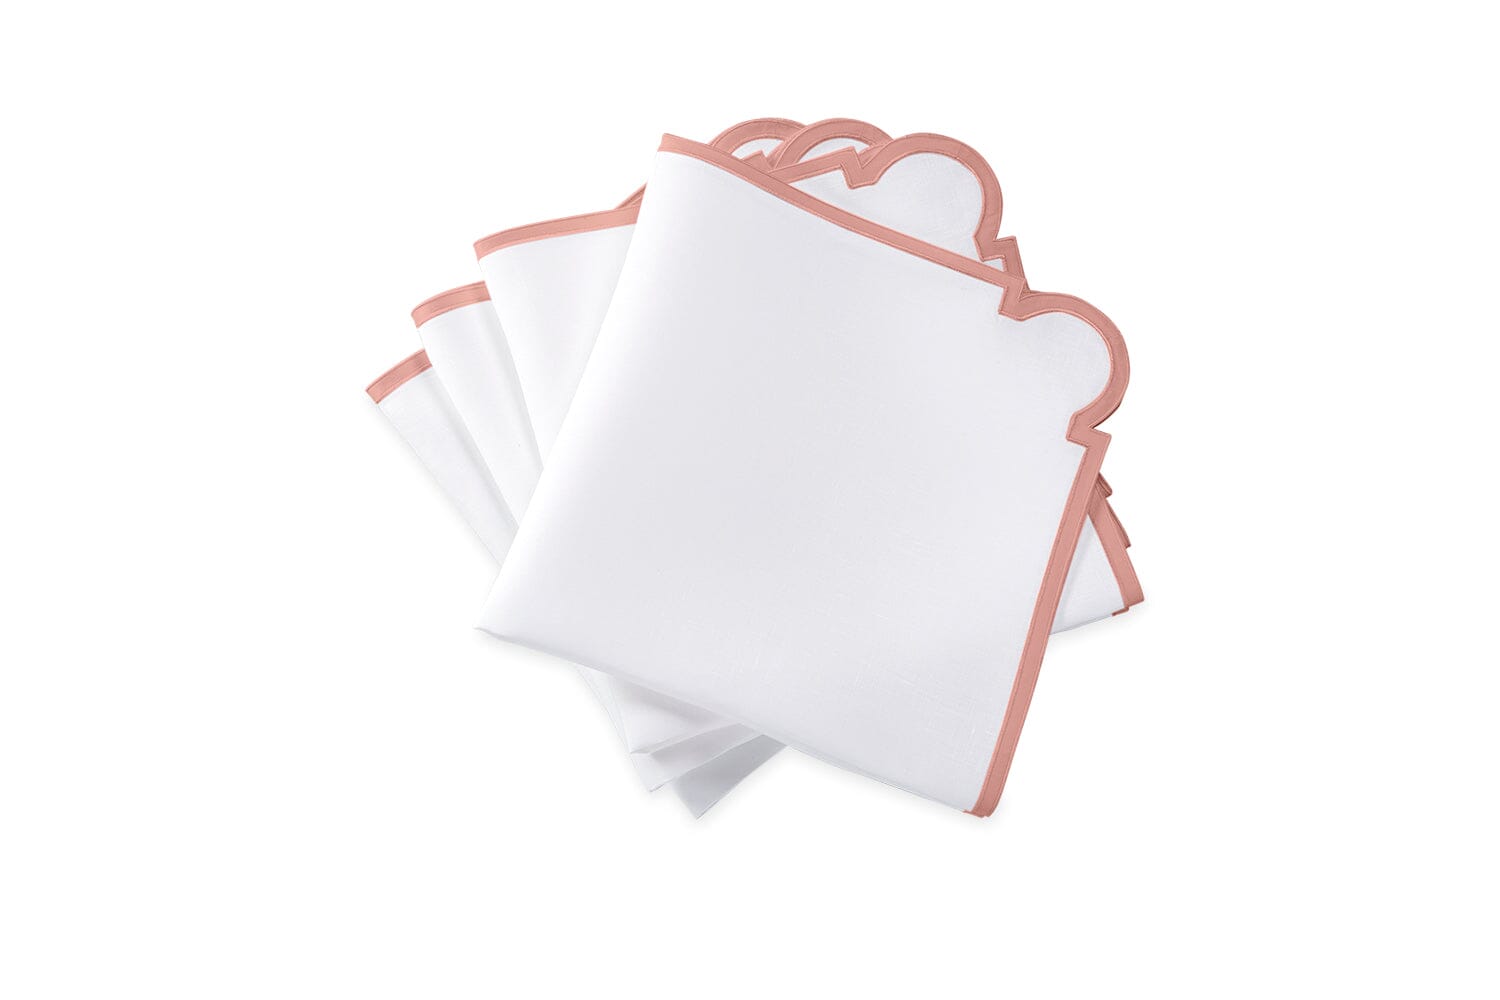 Matouk Mirasol Napkins in Shell | Fig Linens and Home